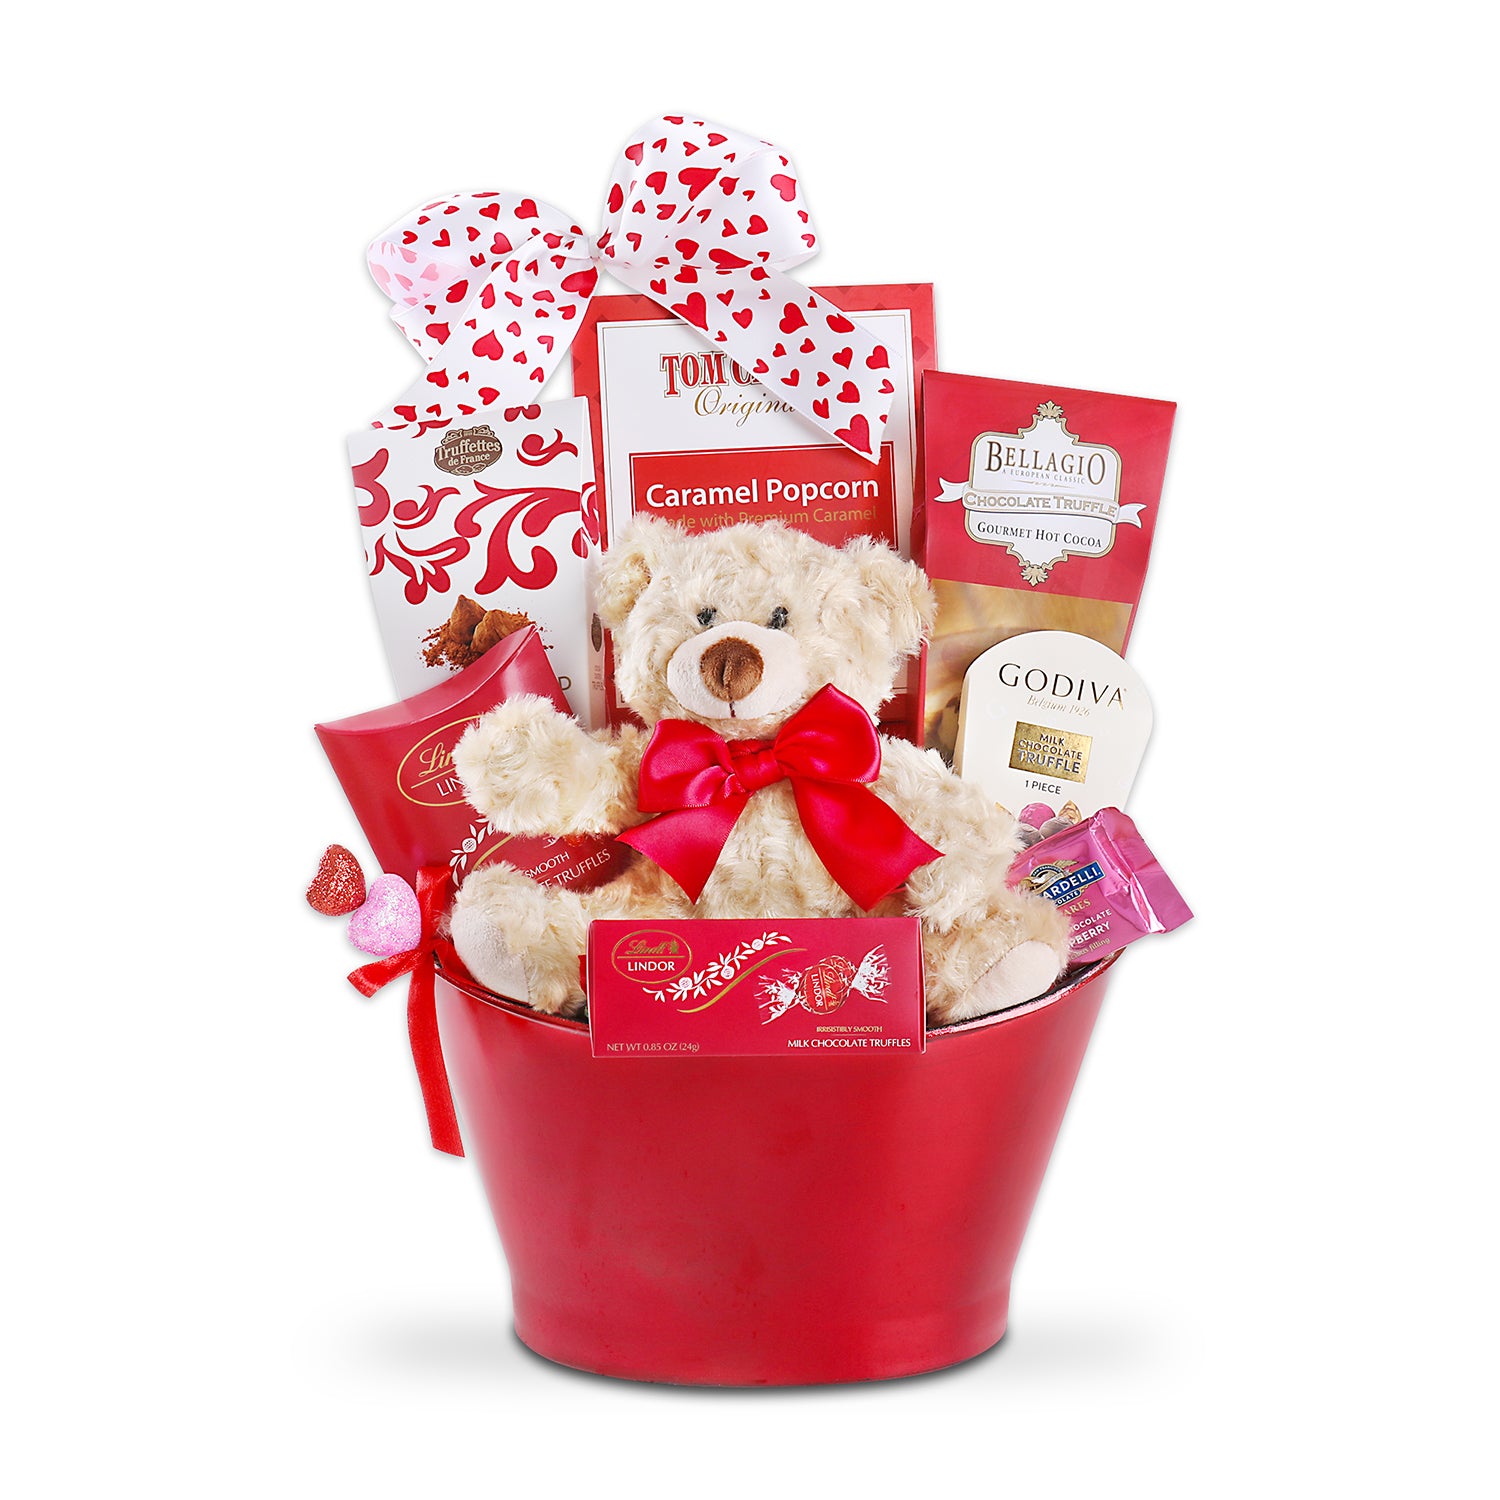 Gift basket assembled with white and red heart bow